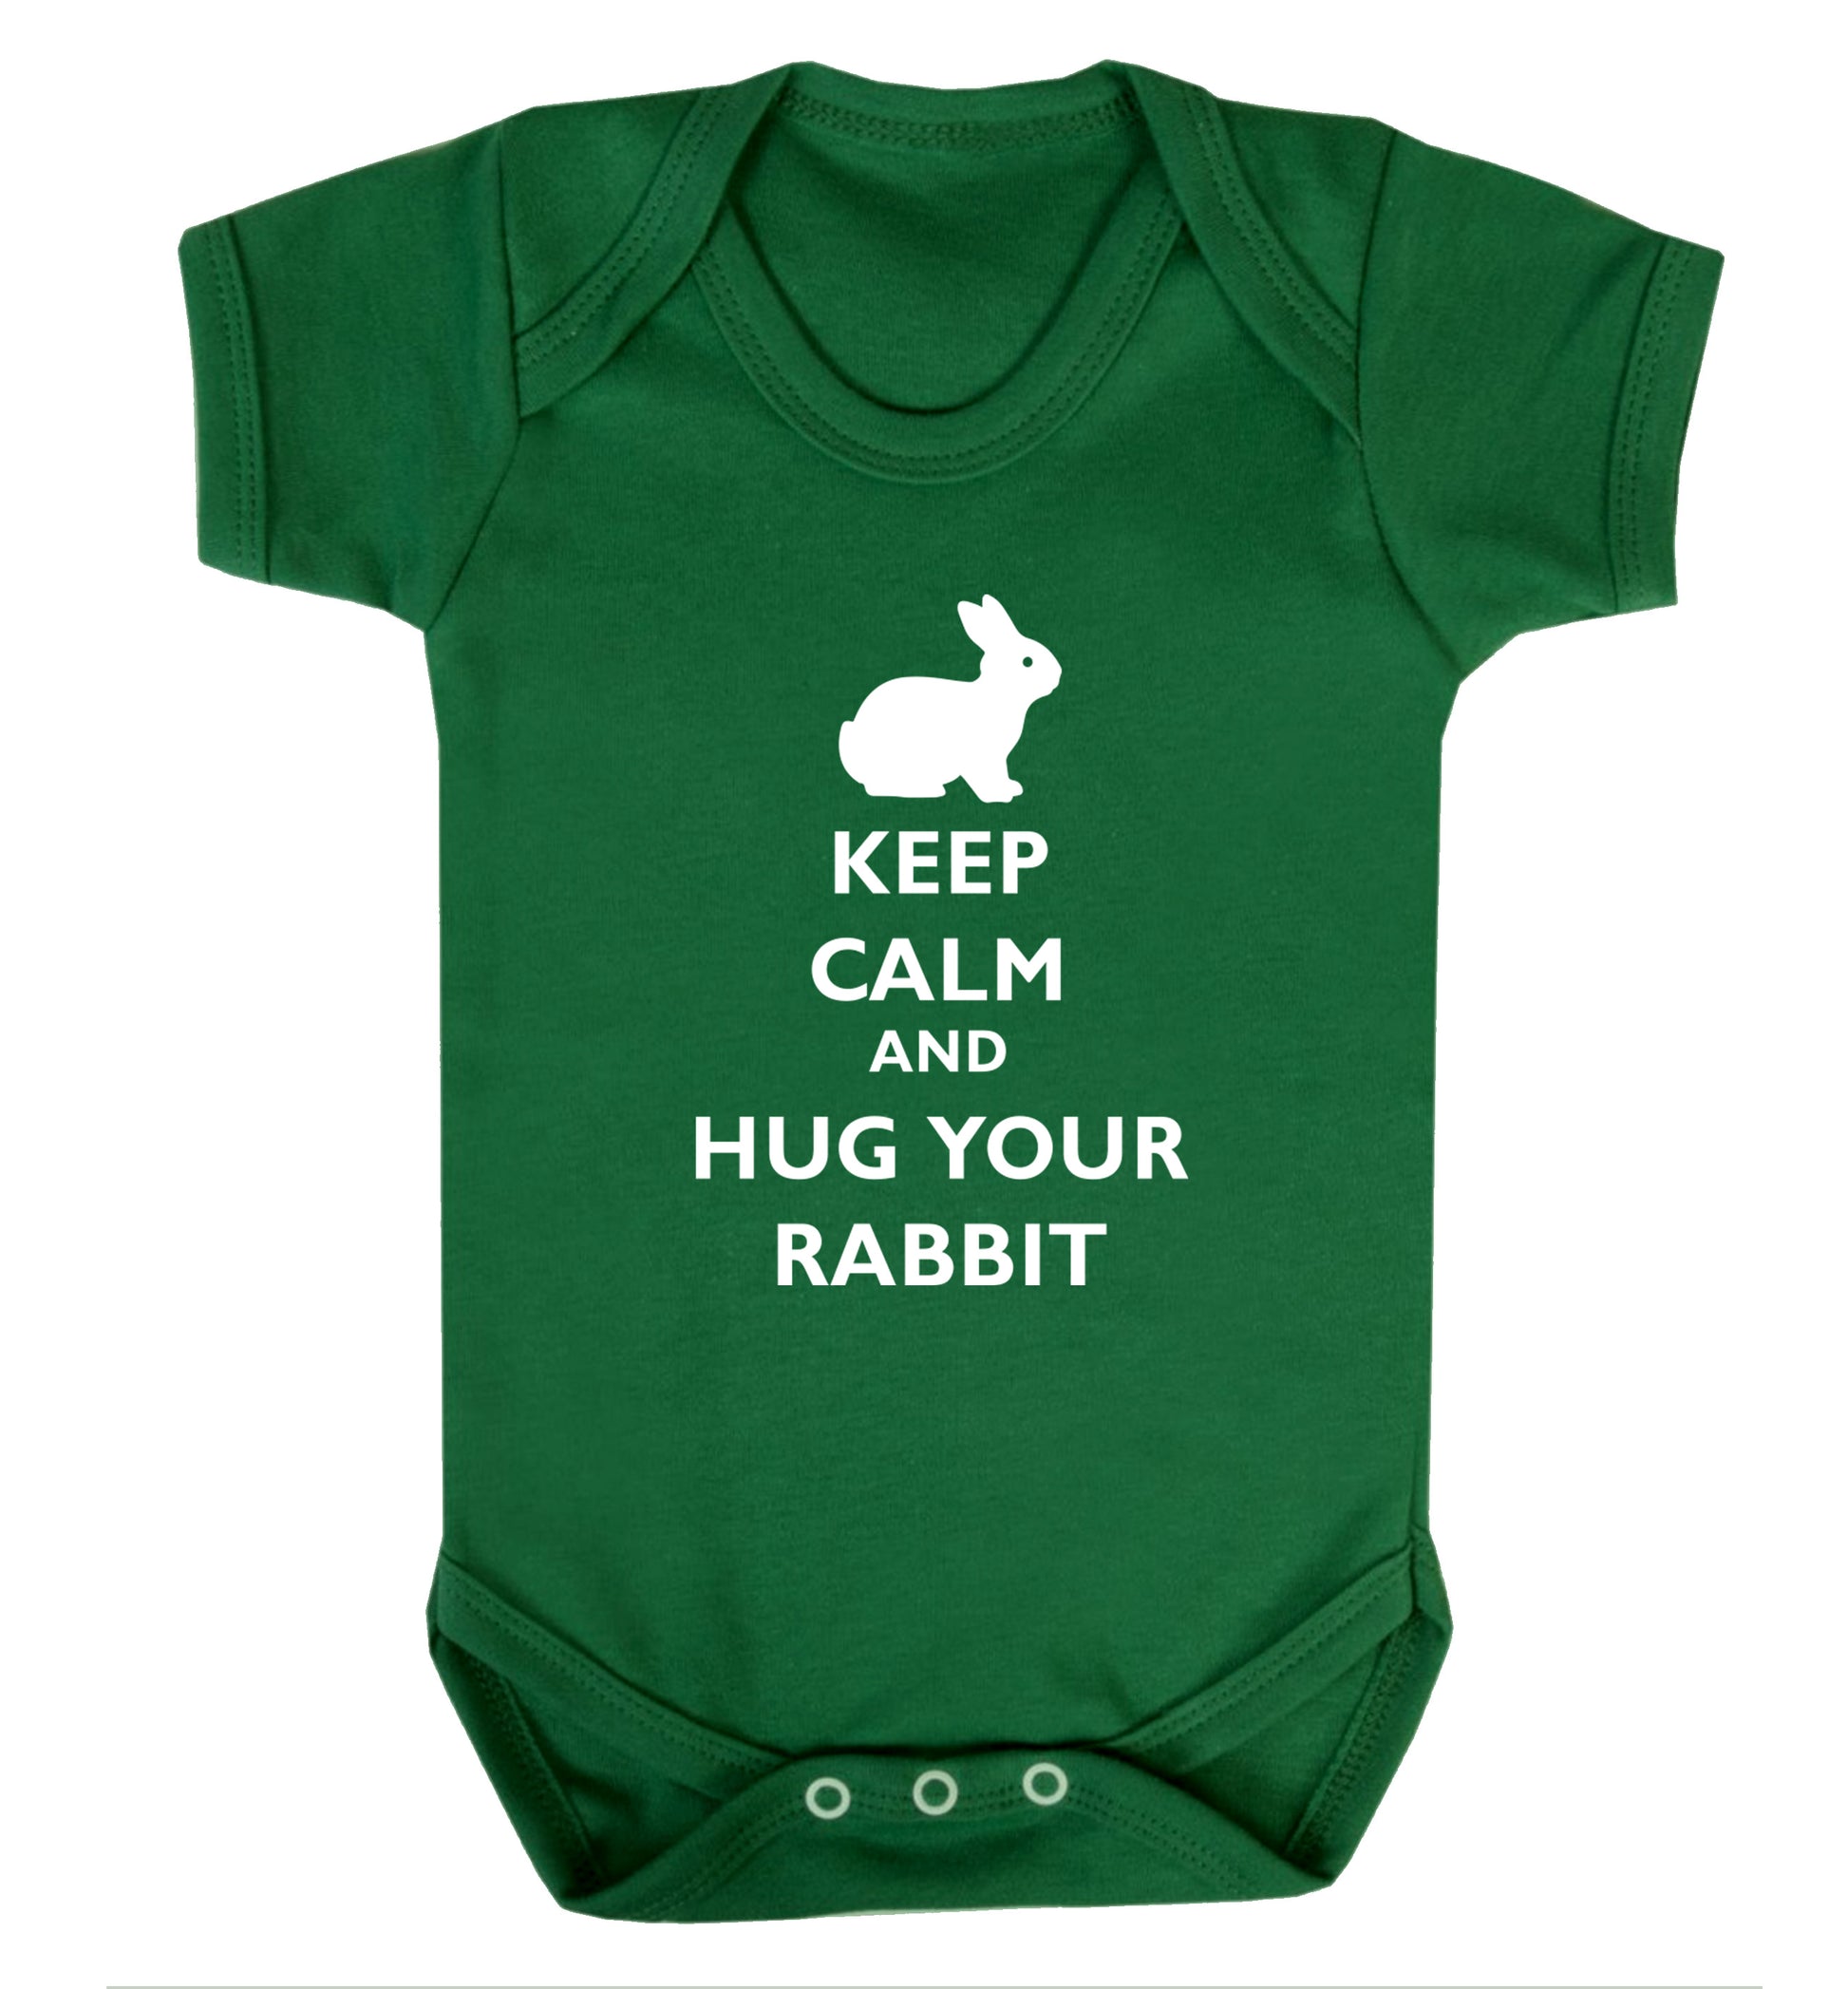 Keep calm and hug your rabbit Baby Vest green 18-24 months